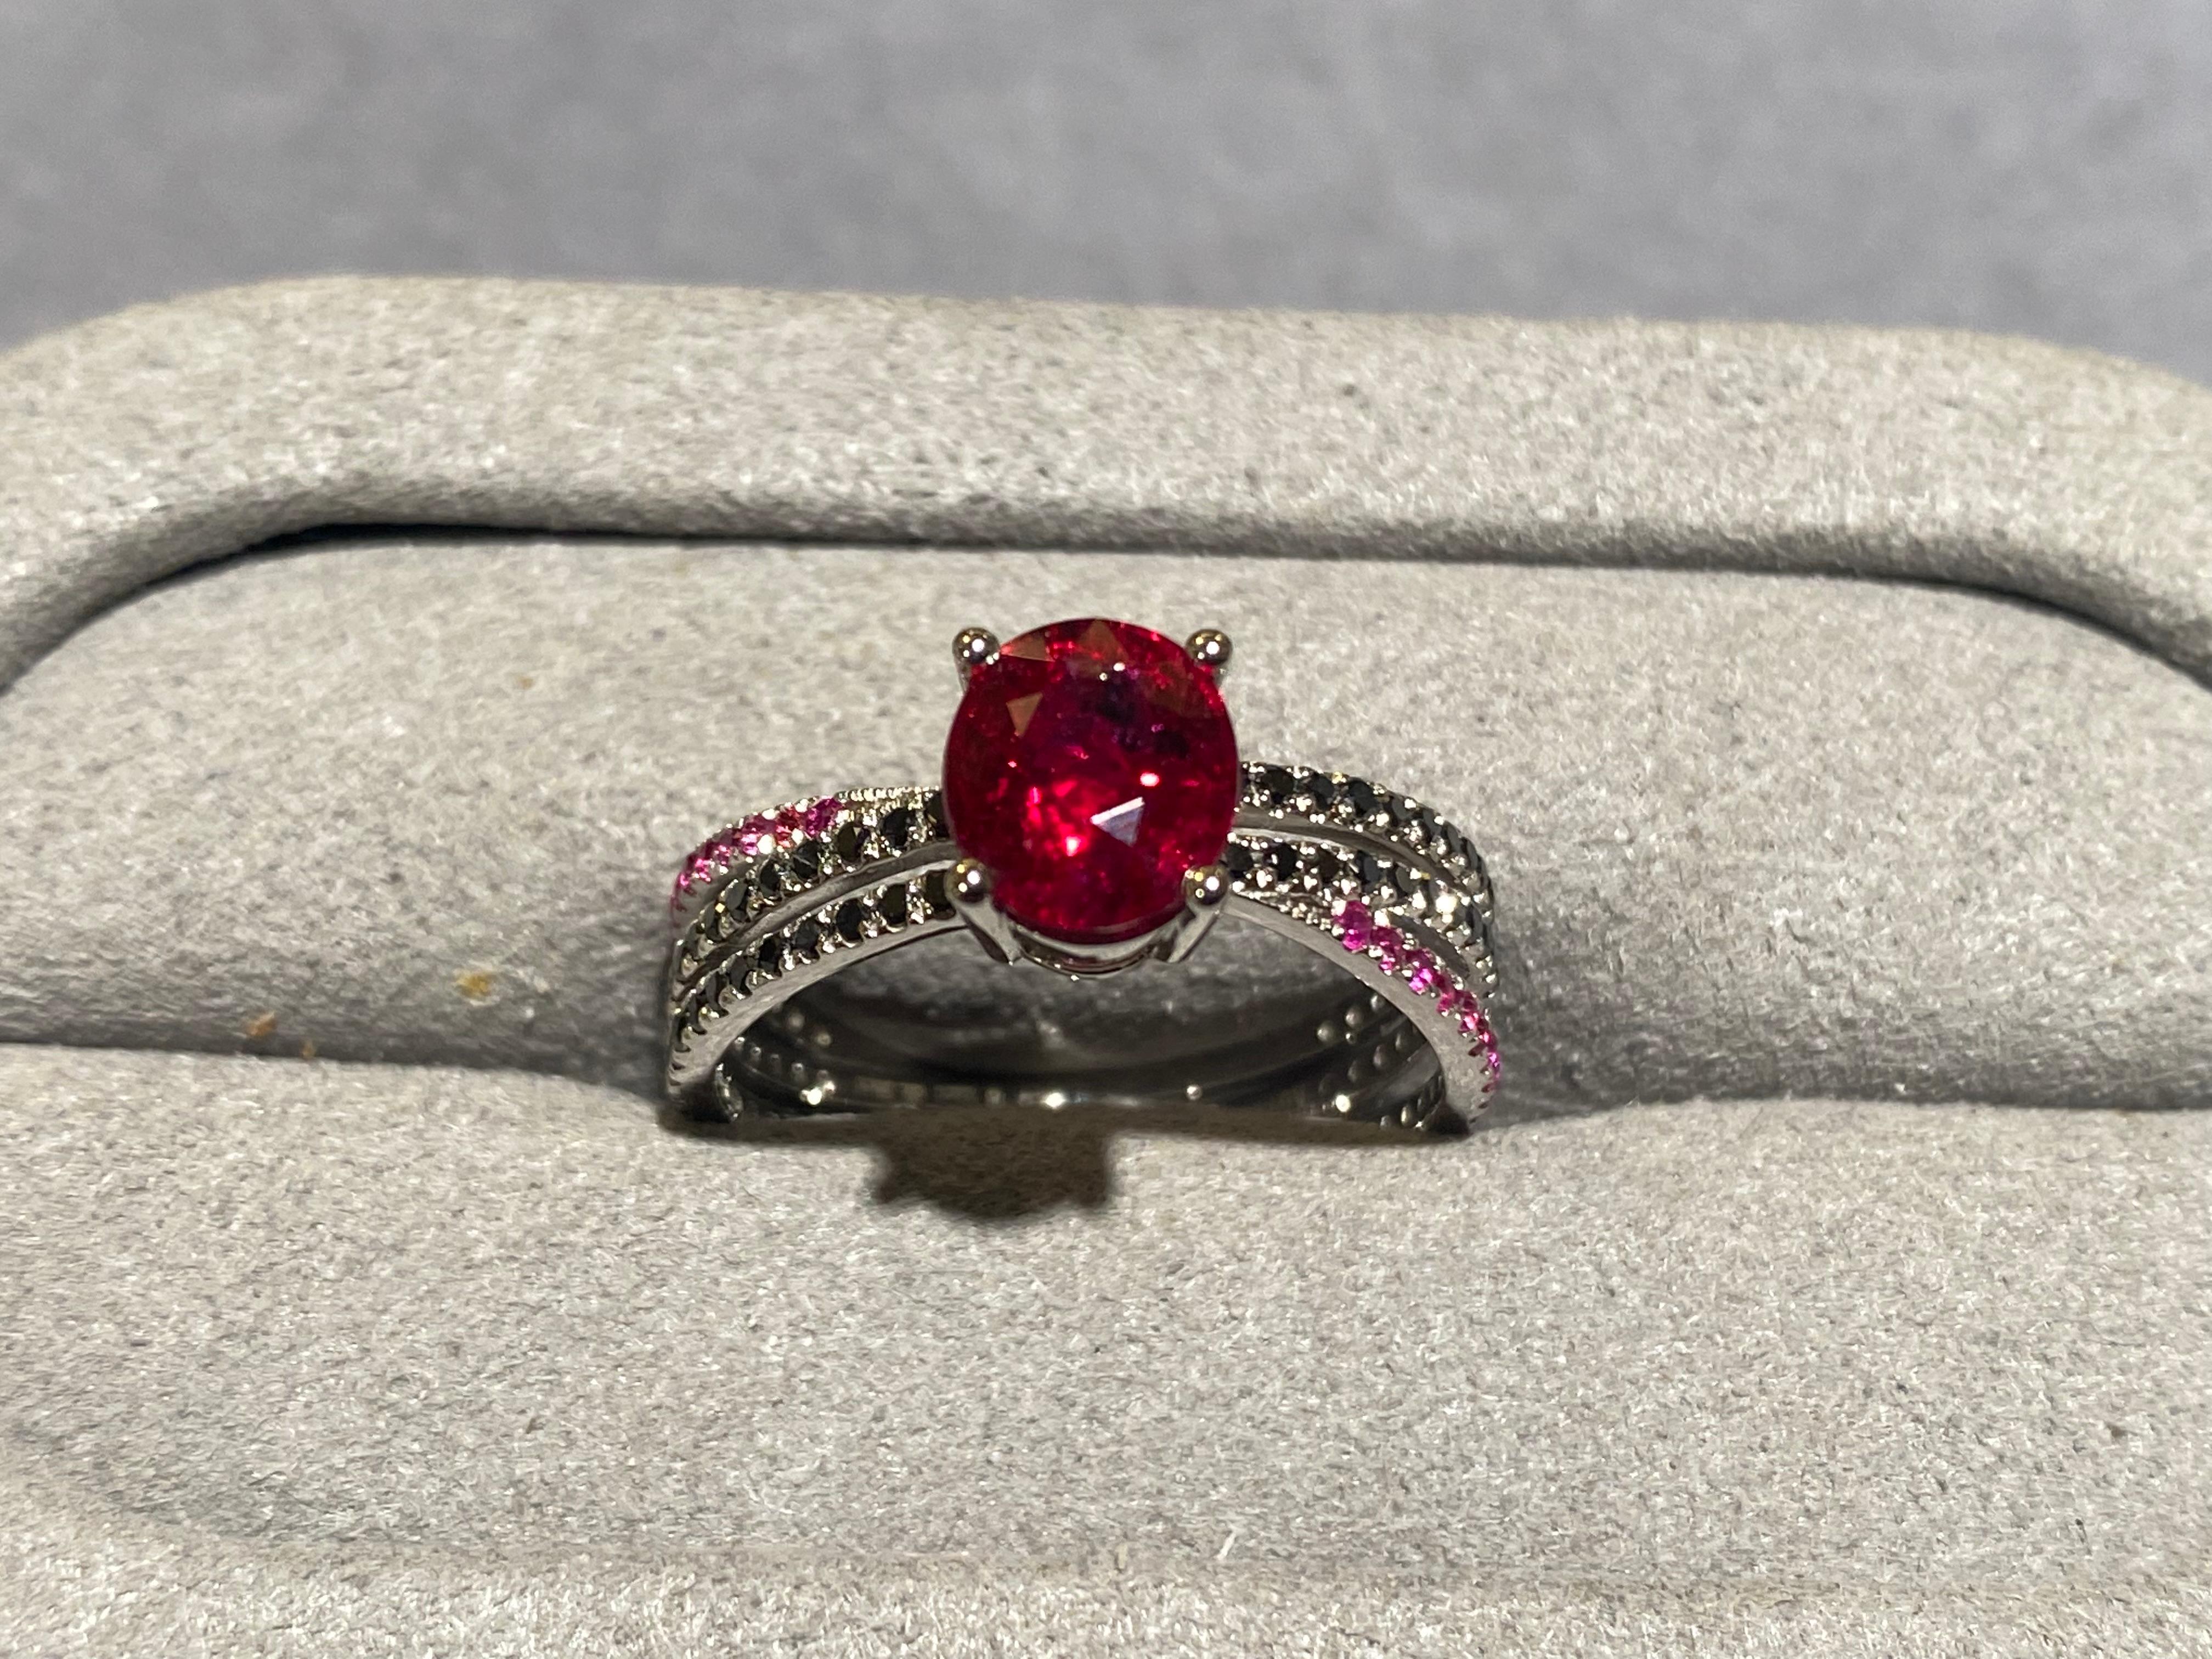 Ruby and black diamond ring in 18k white gold. The main ruby is secured by 4 white gold claws and the band of the ring is made up of 3 individual pave bands. The 2 black diamond pave bends are parallel to each other while the ruby pave bend